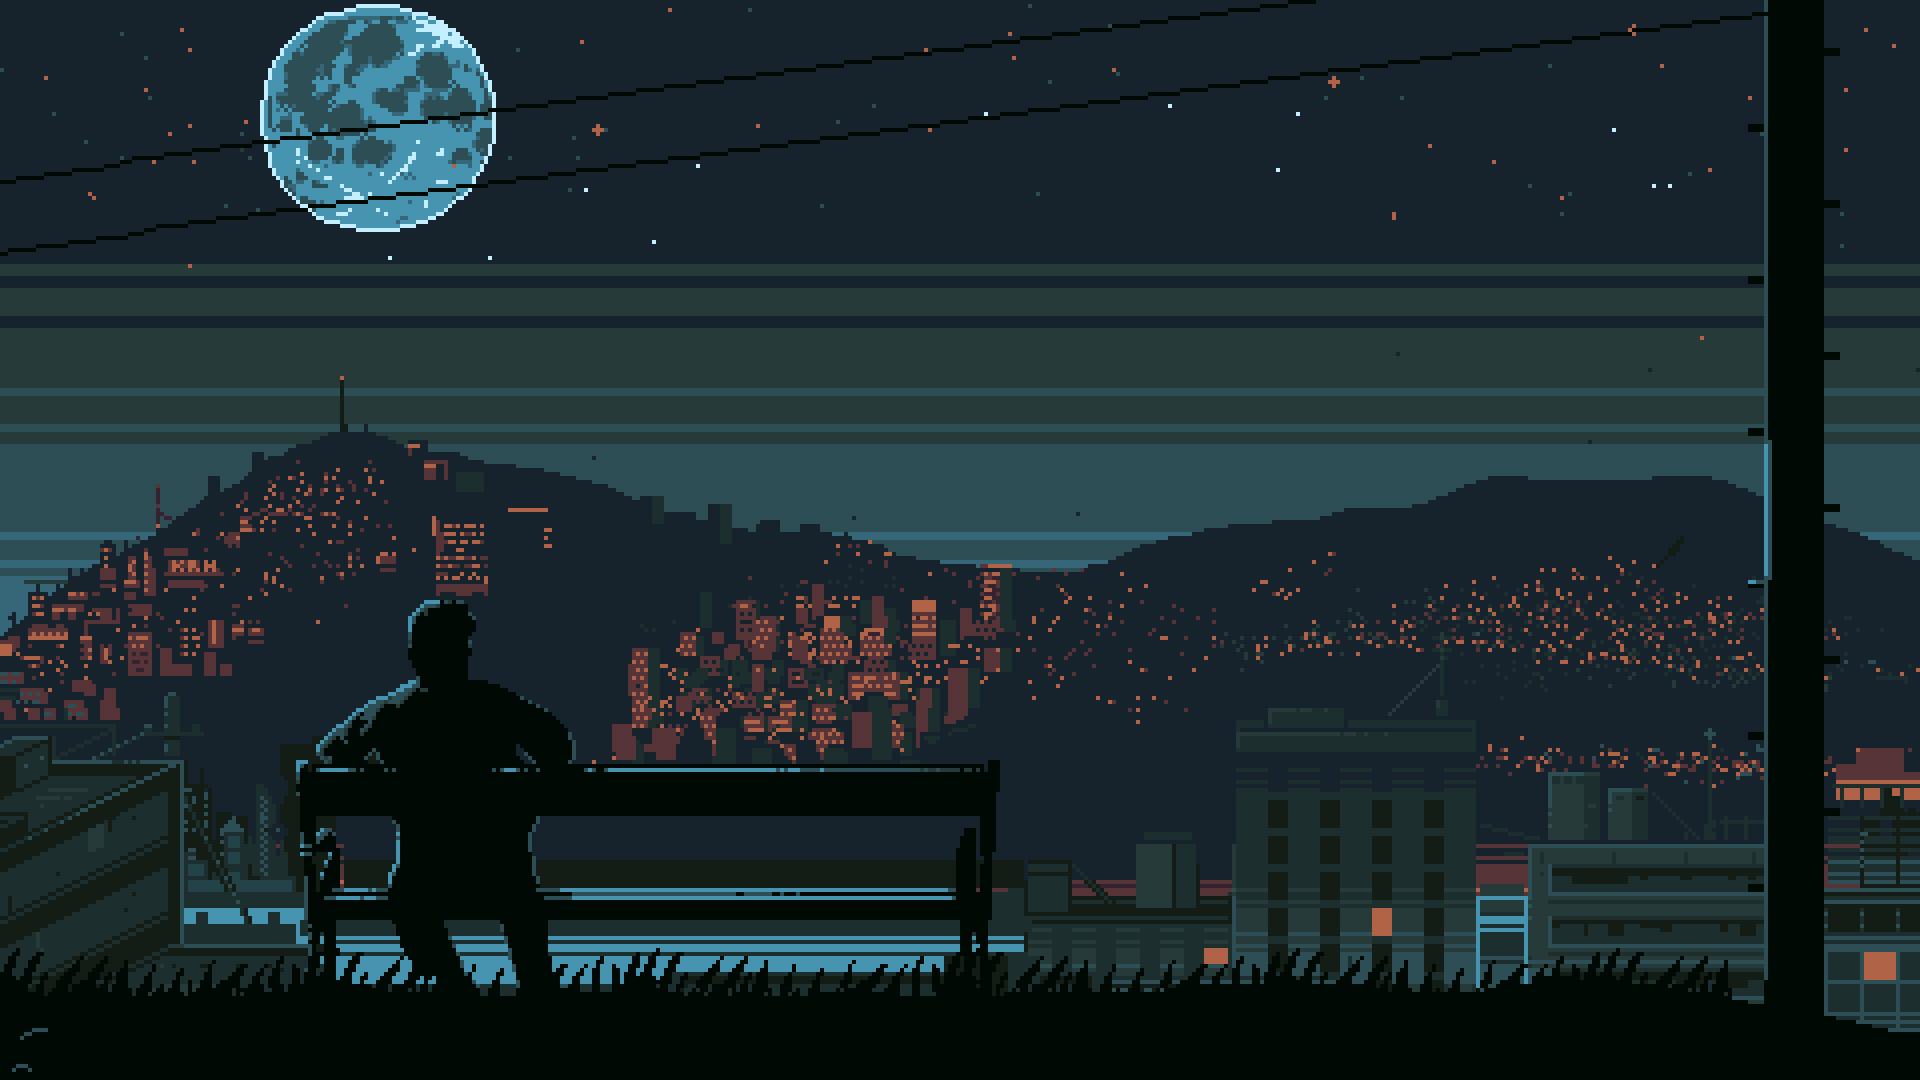 Pixel art image of a man sitting on a bench looking at a city at night - Pixel art